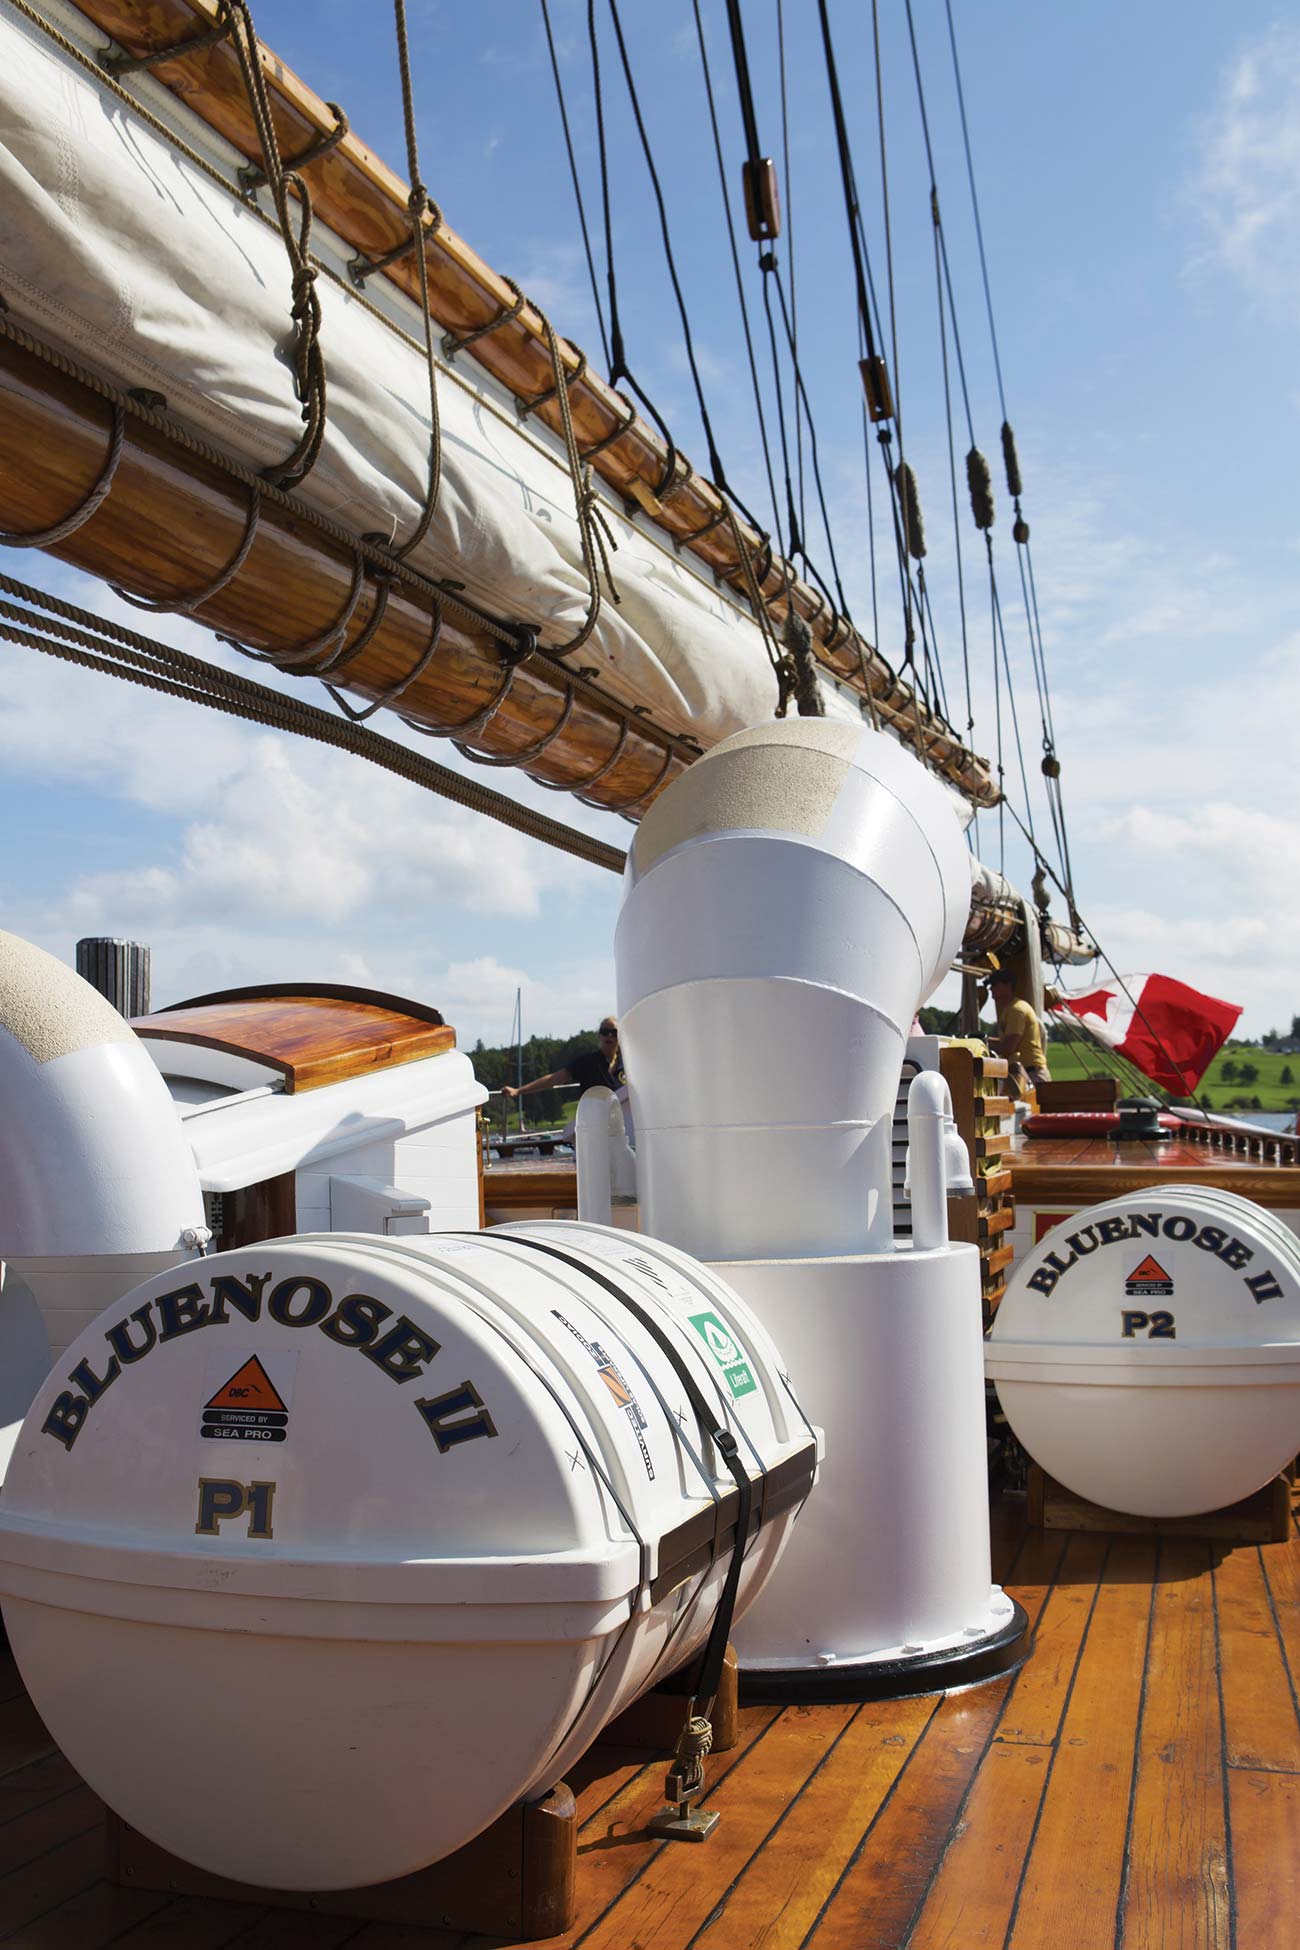 Set sail aboard a replica of Canadas most famous sailing ship to be immersed - photo 18